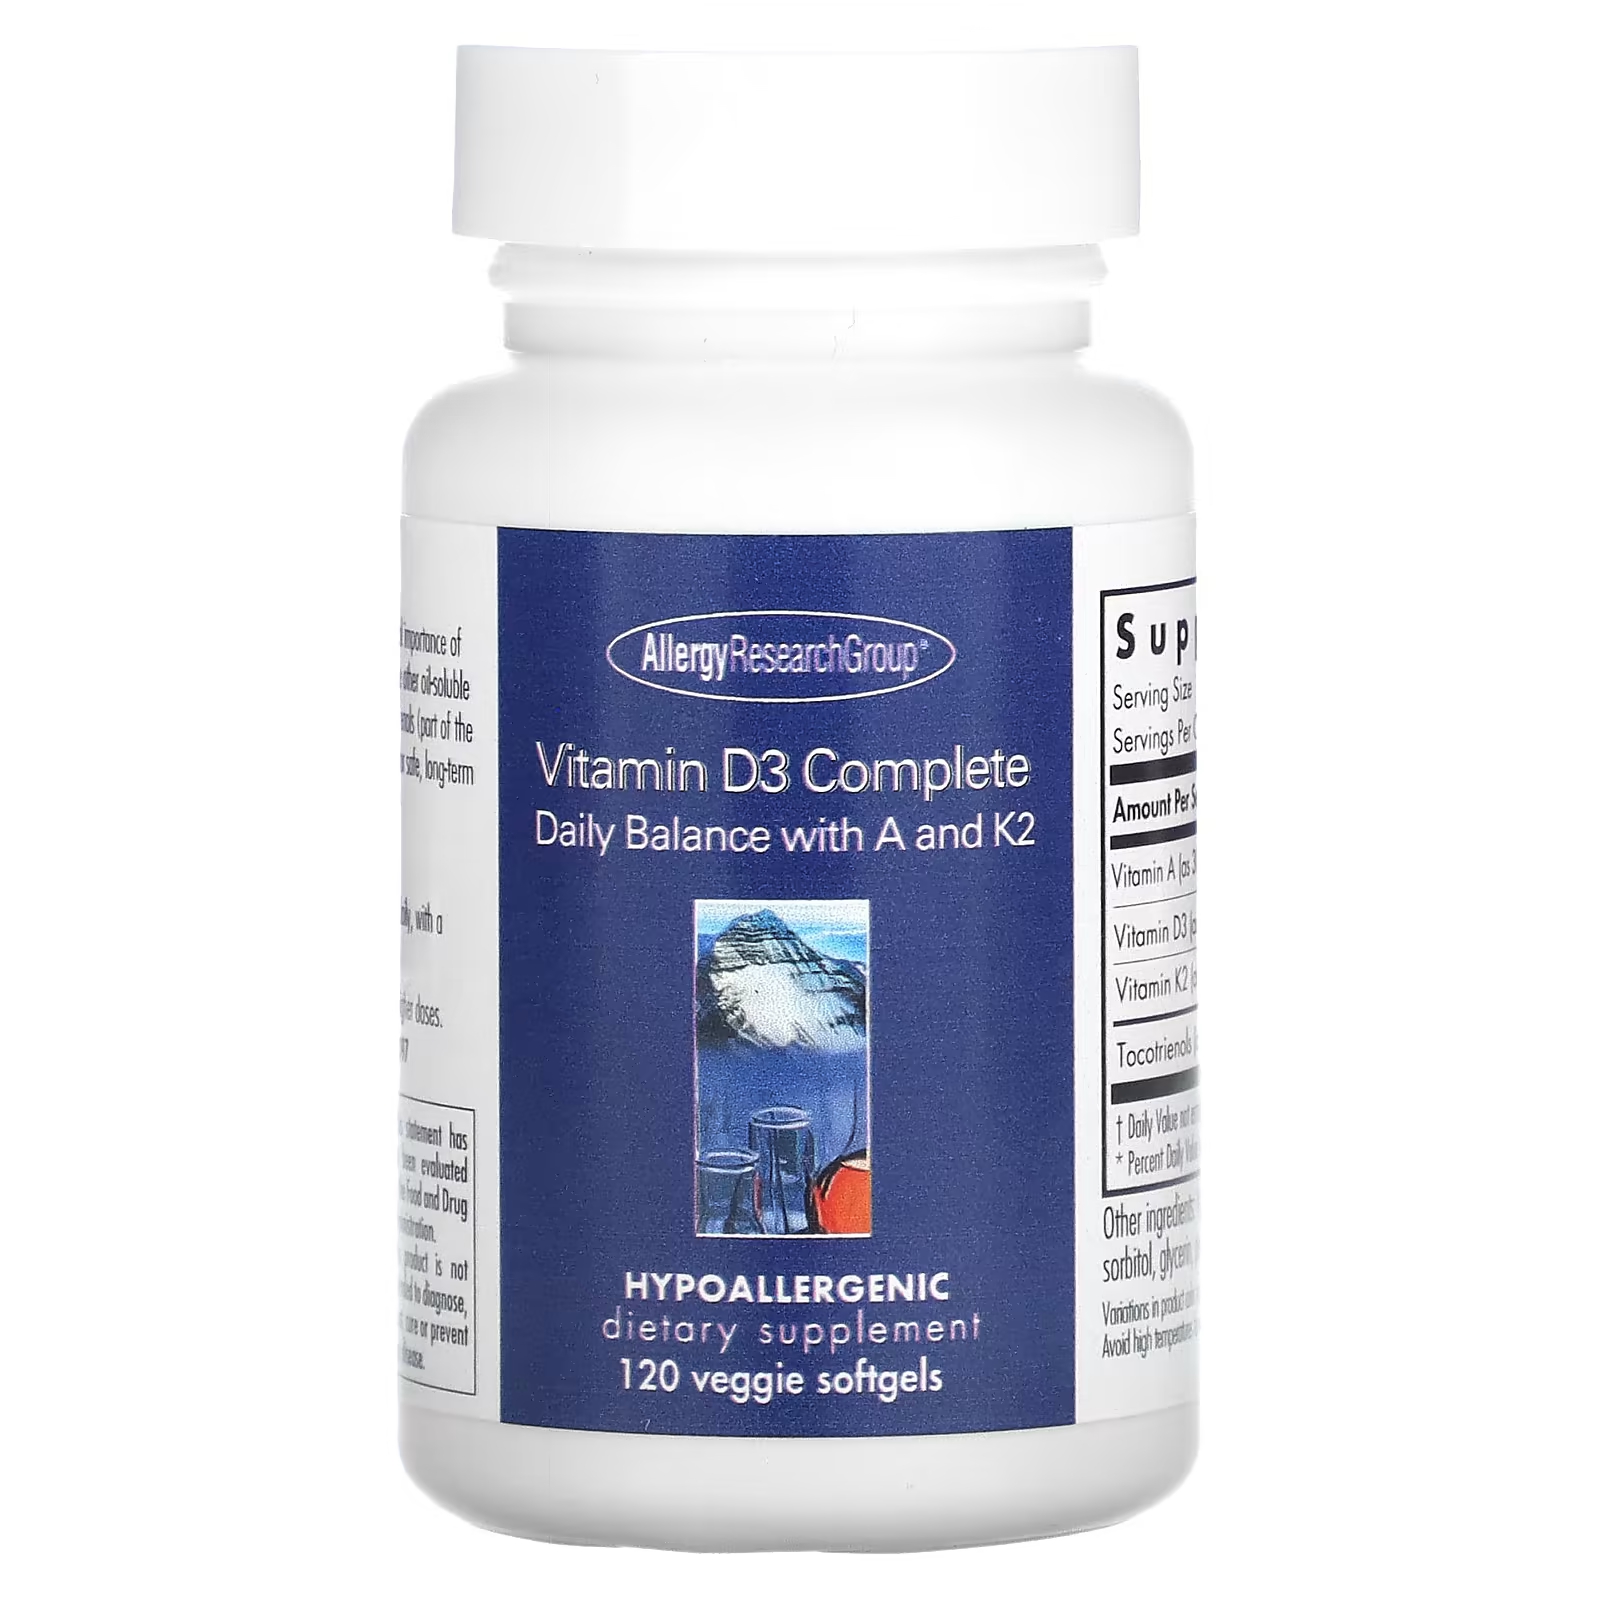 allergy research group vitamin d3 complete 5000 iu 60 softgels Витамин D3 Allergy Research Group Complete, 120 мягких таблеток